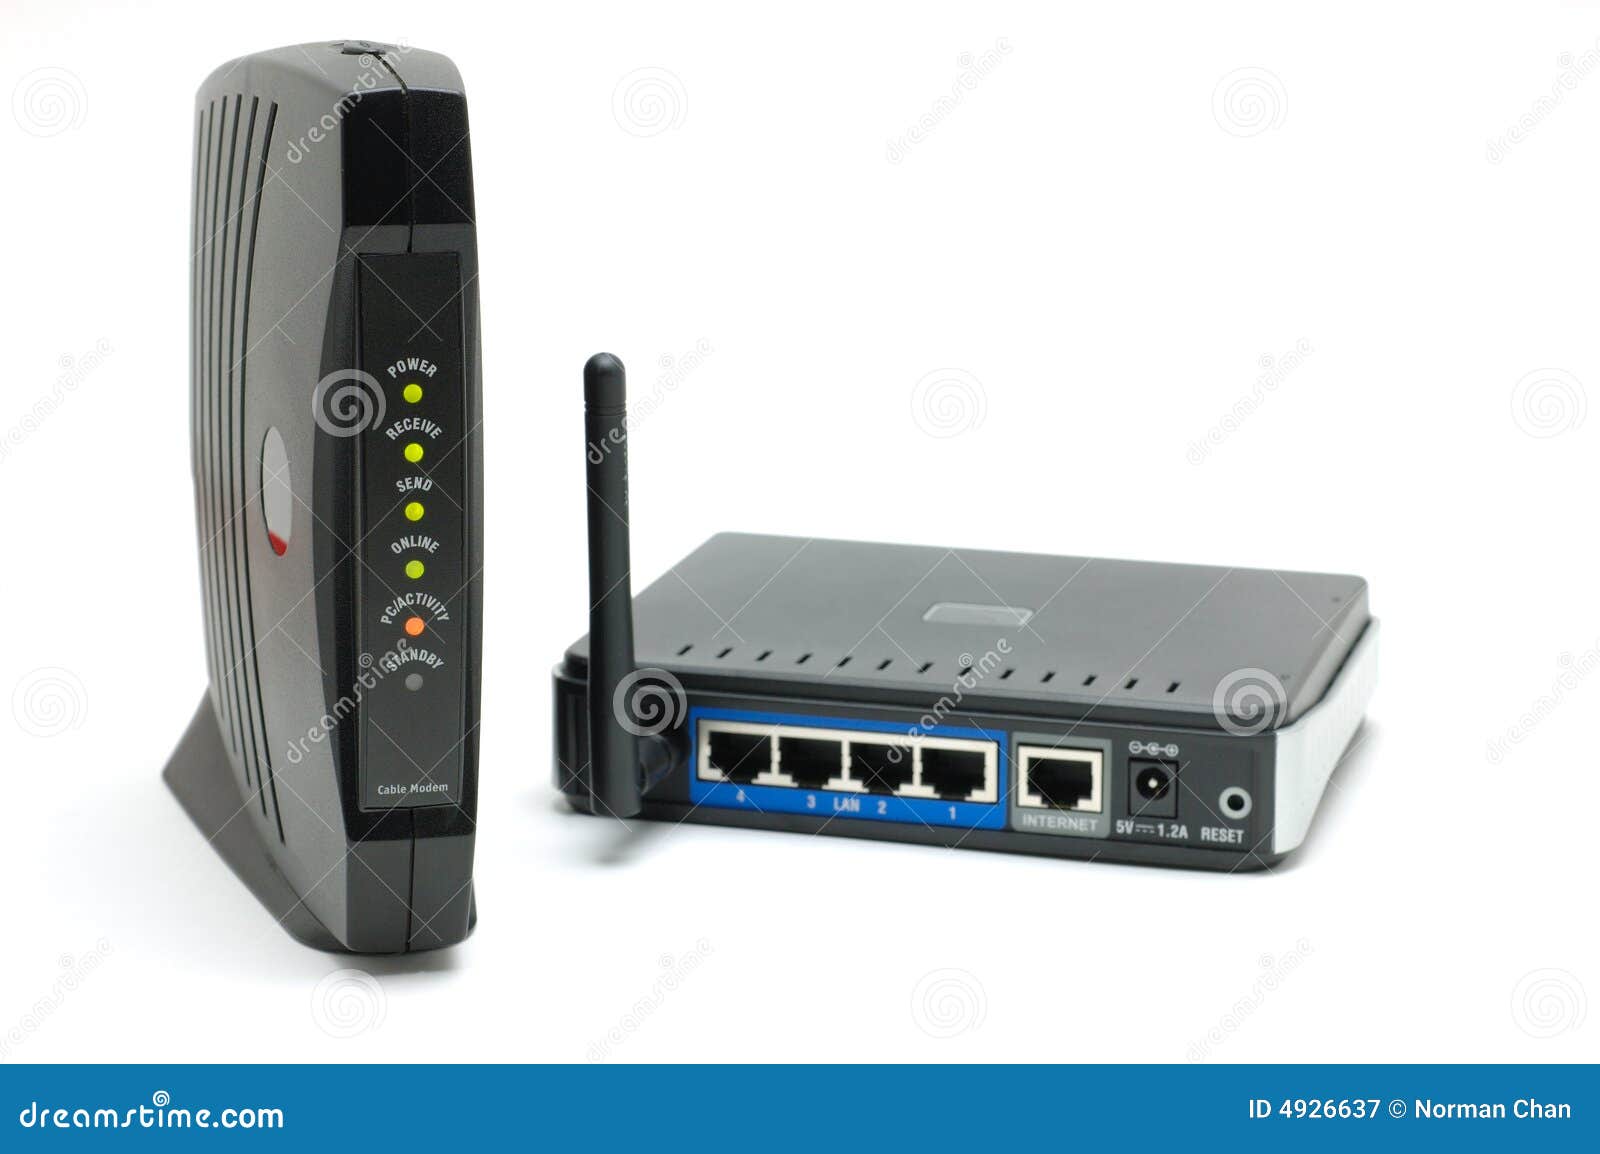 Cable modem and router stock image. Image of technology - 25